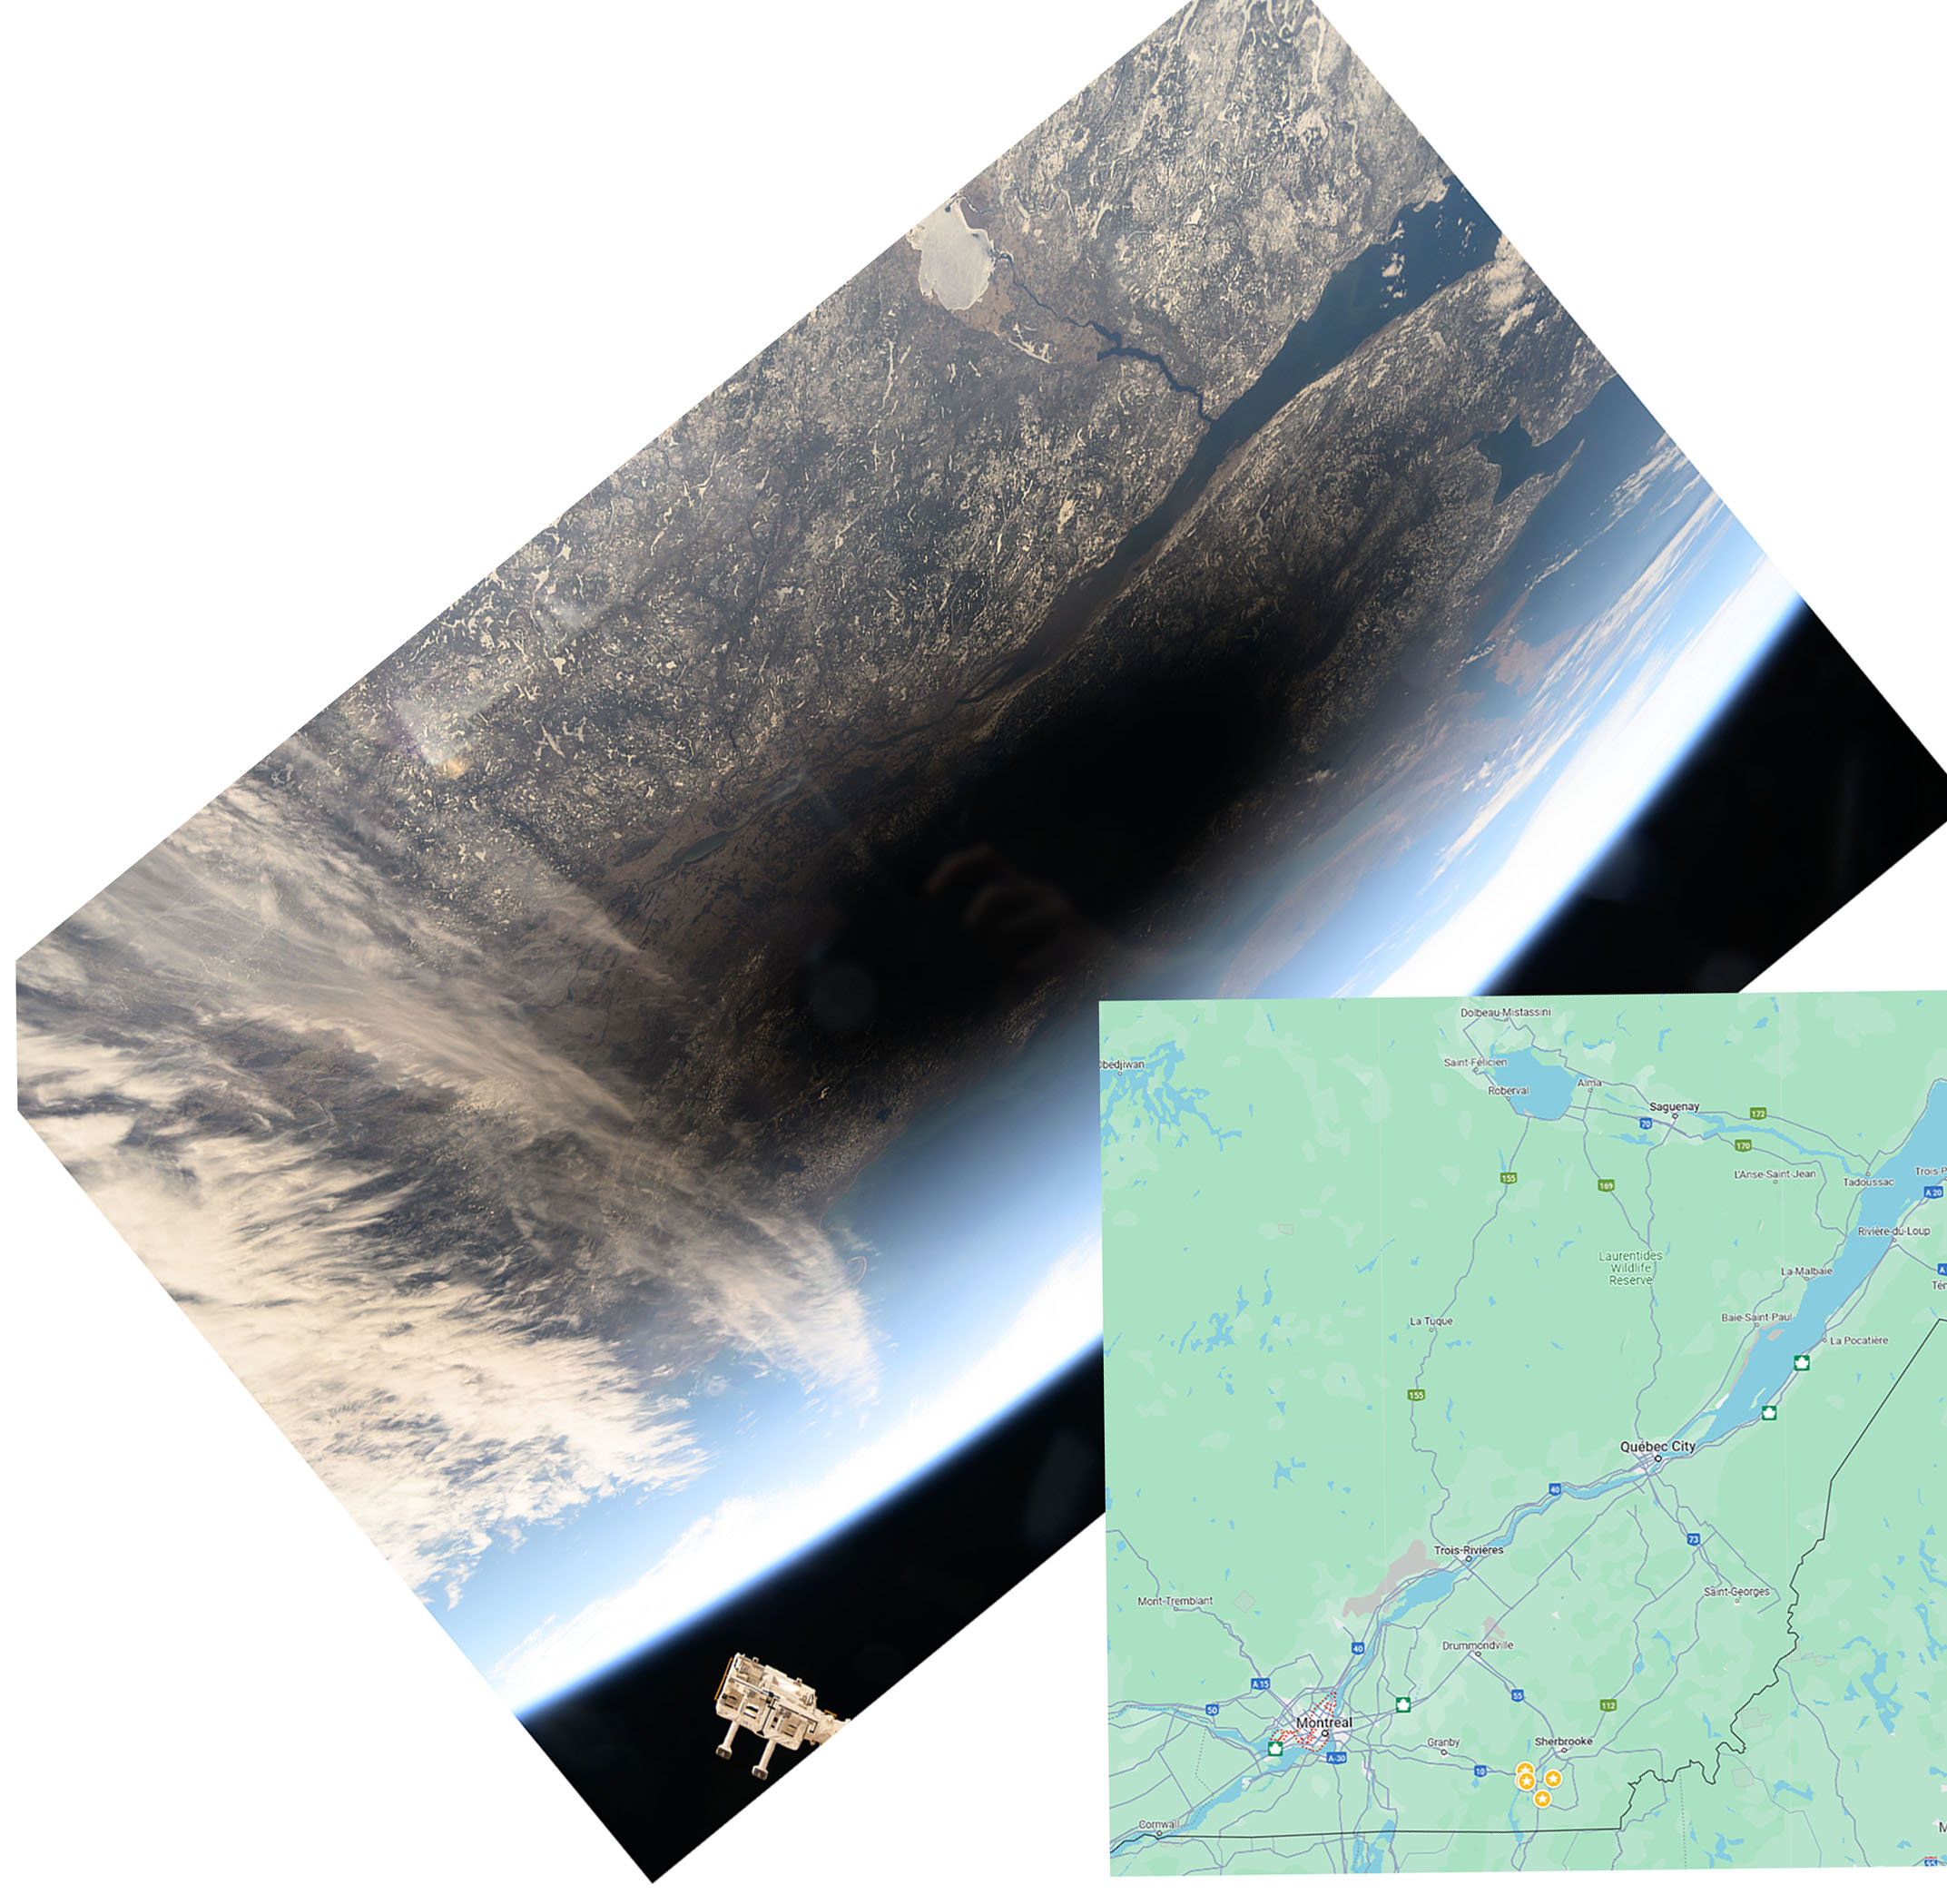 A view from the International Space Station of the moon's shadow over Quebec and Maine. Keith aligned the photo with a map of the area, we are the yellow dots on the map.